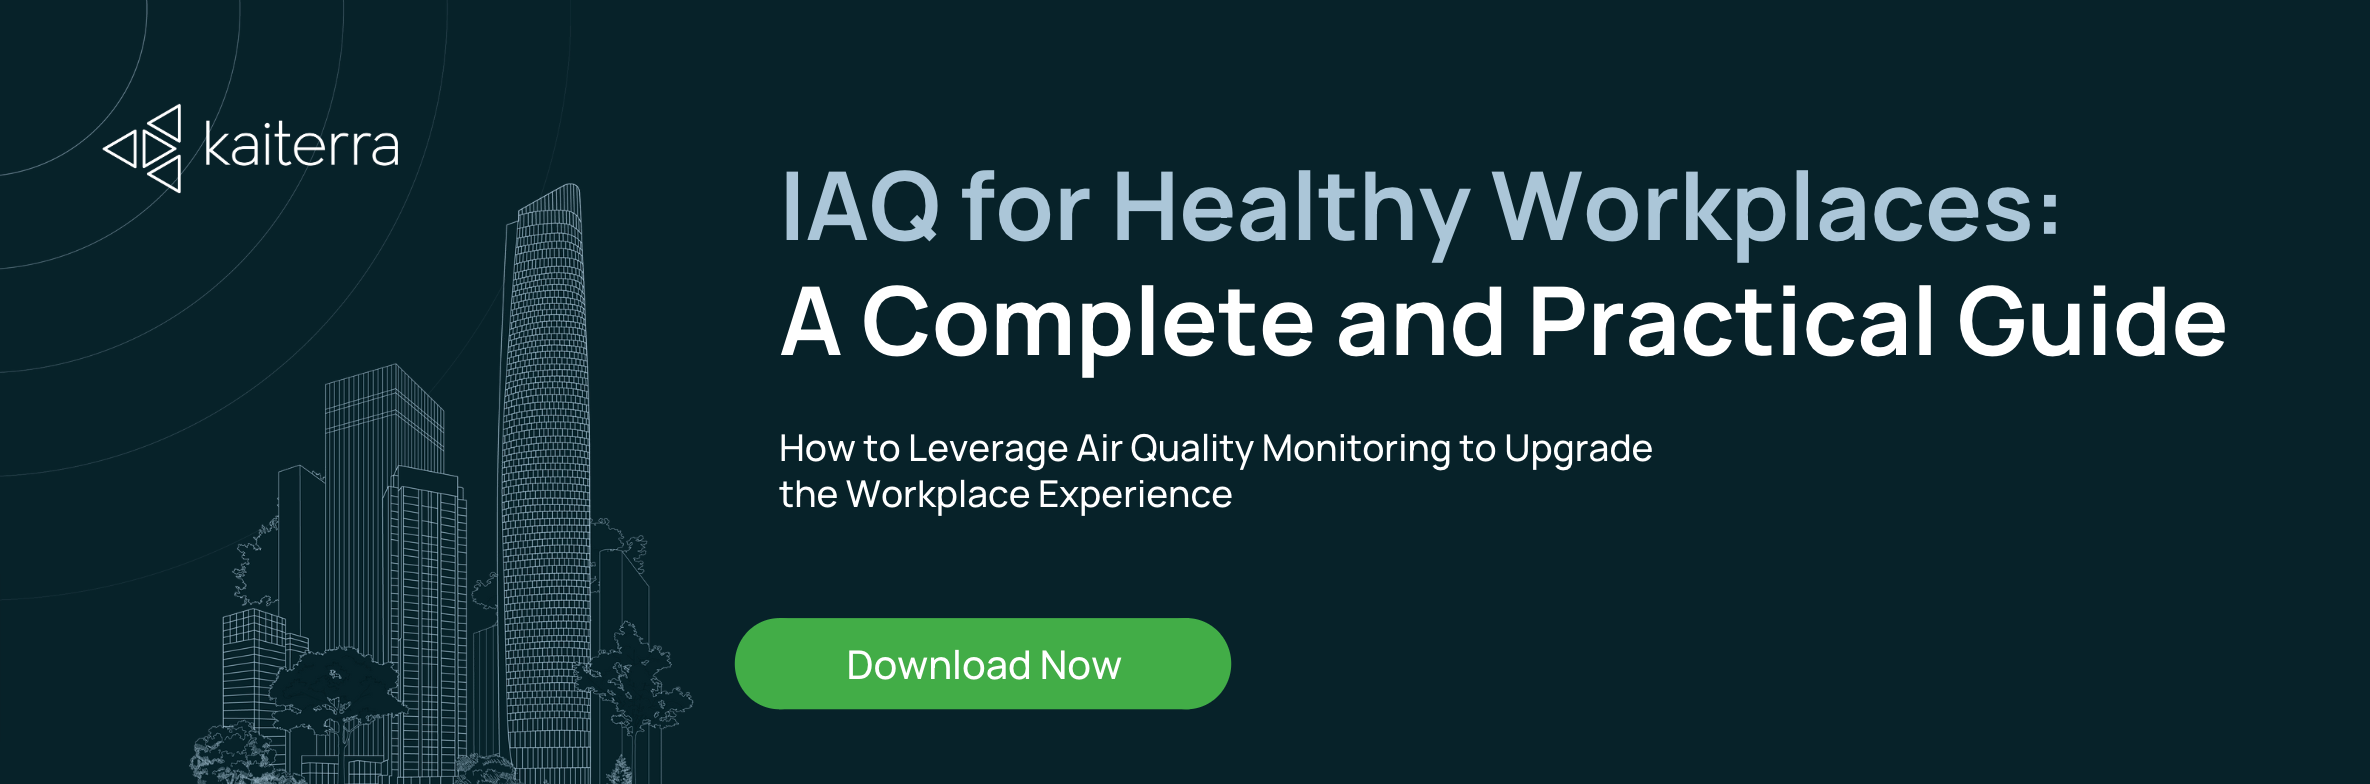 How-to-Leverage-Air-Quality-Monitoring-to-Upgrade-the-Workplace-Experience-1